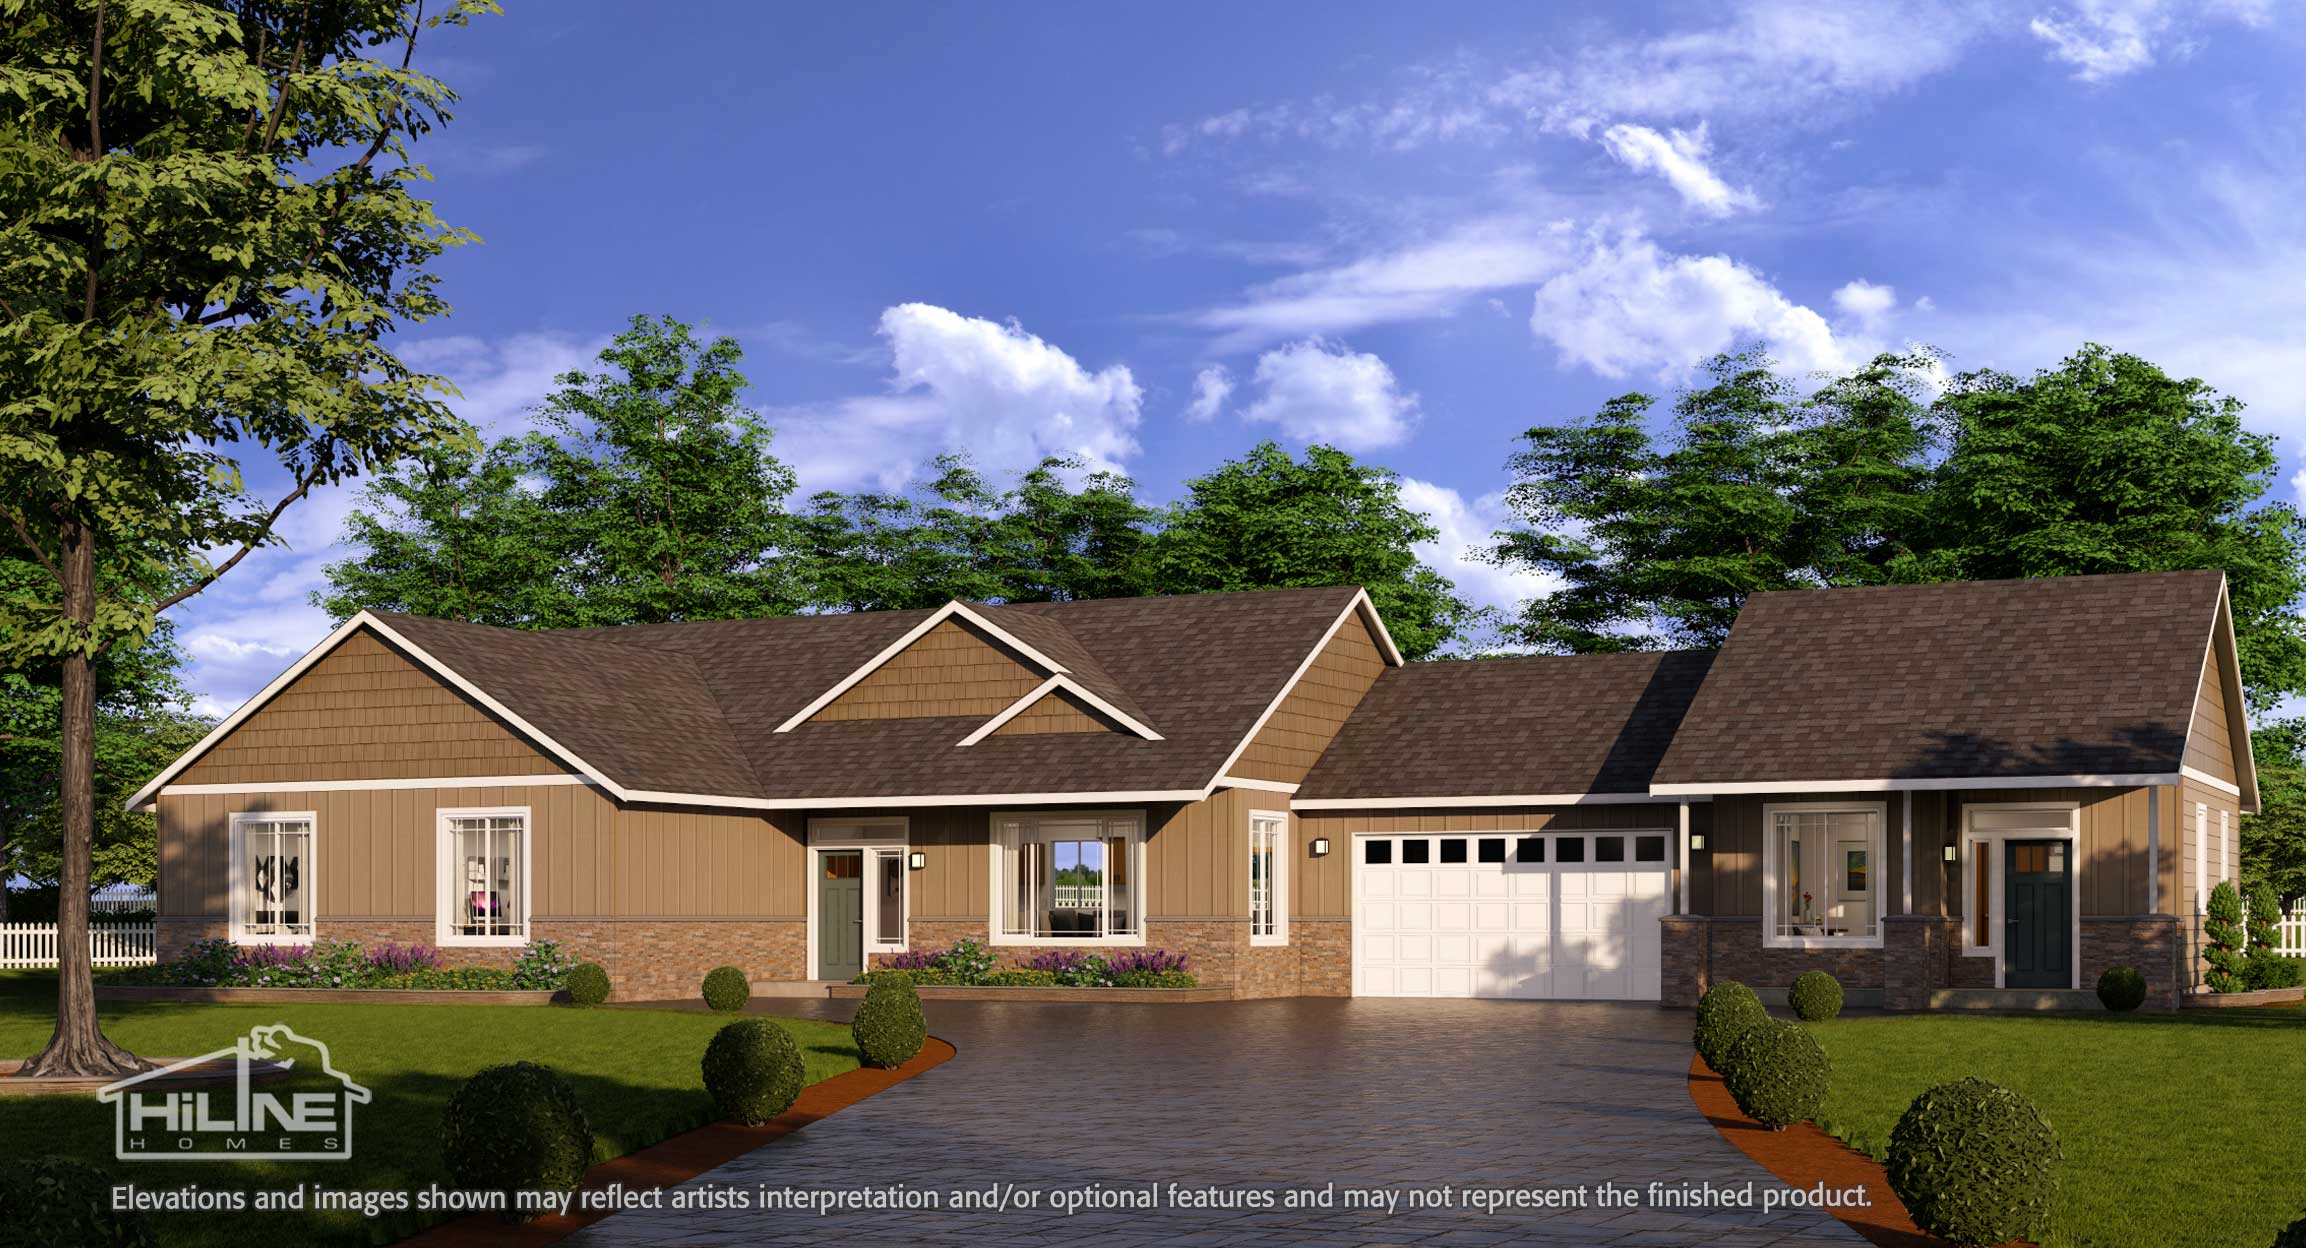 Image of Home Plan 2112 Enhanced Rendering with 500B ADU Attached.